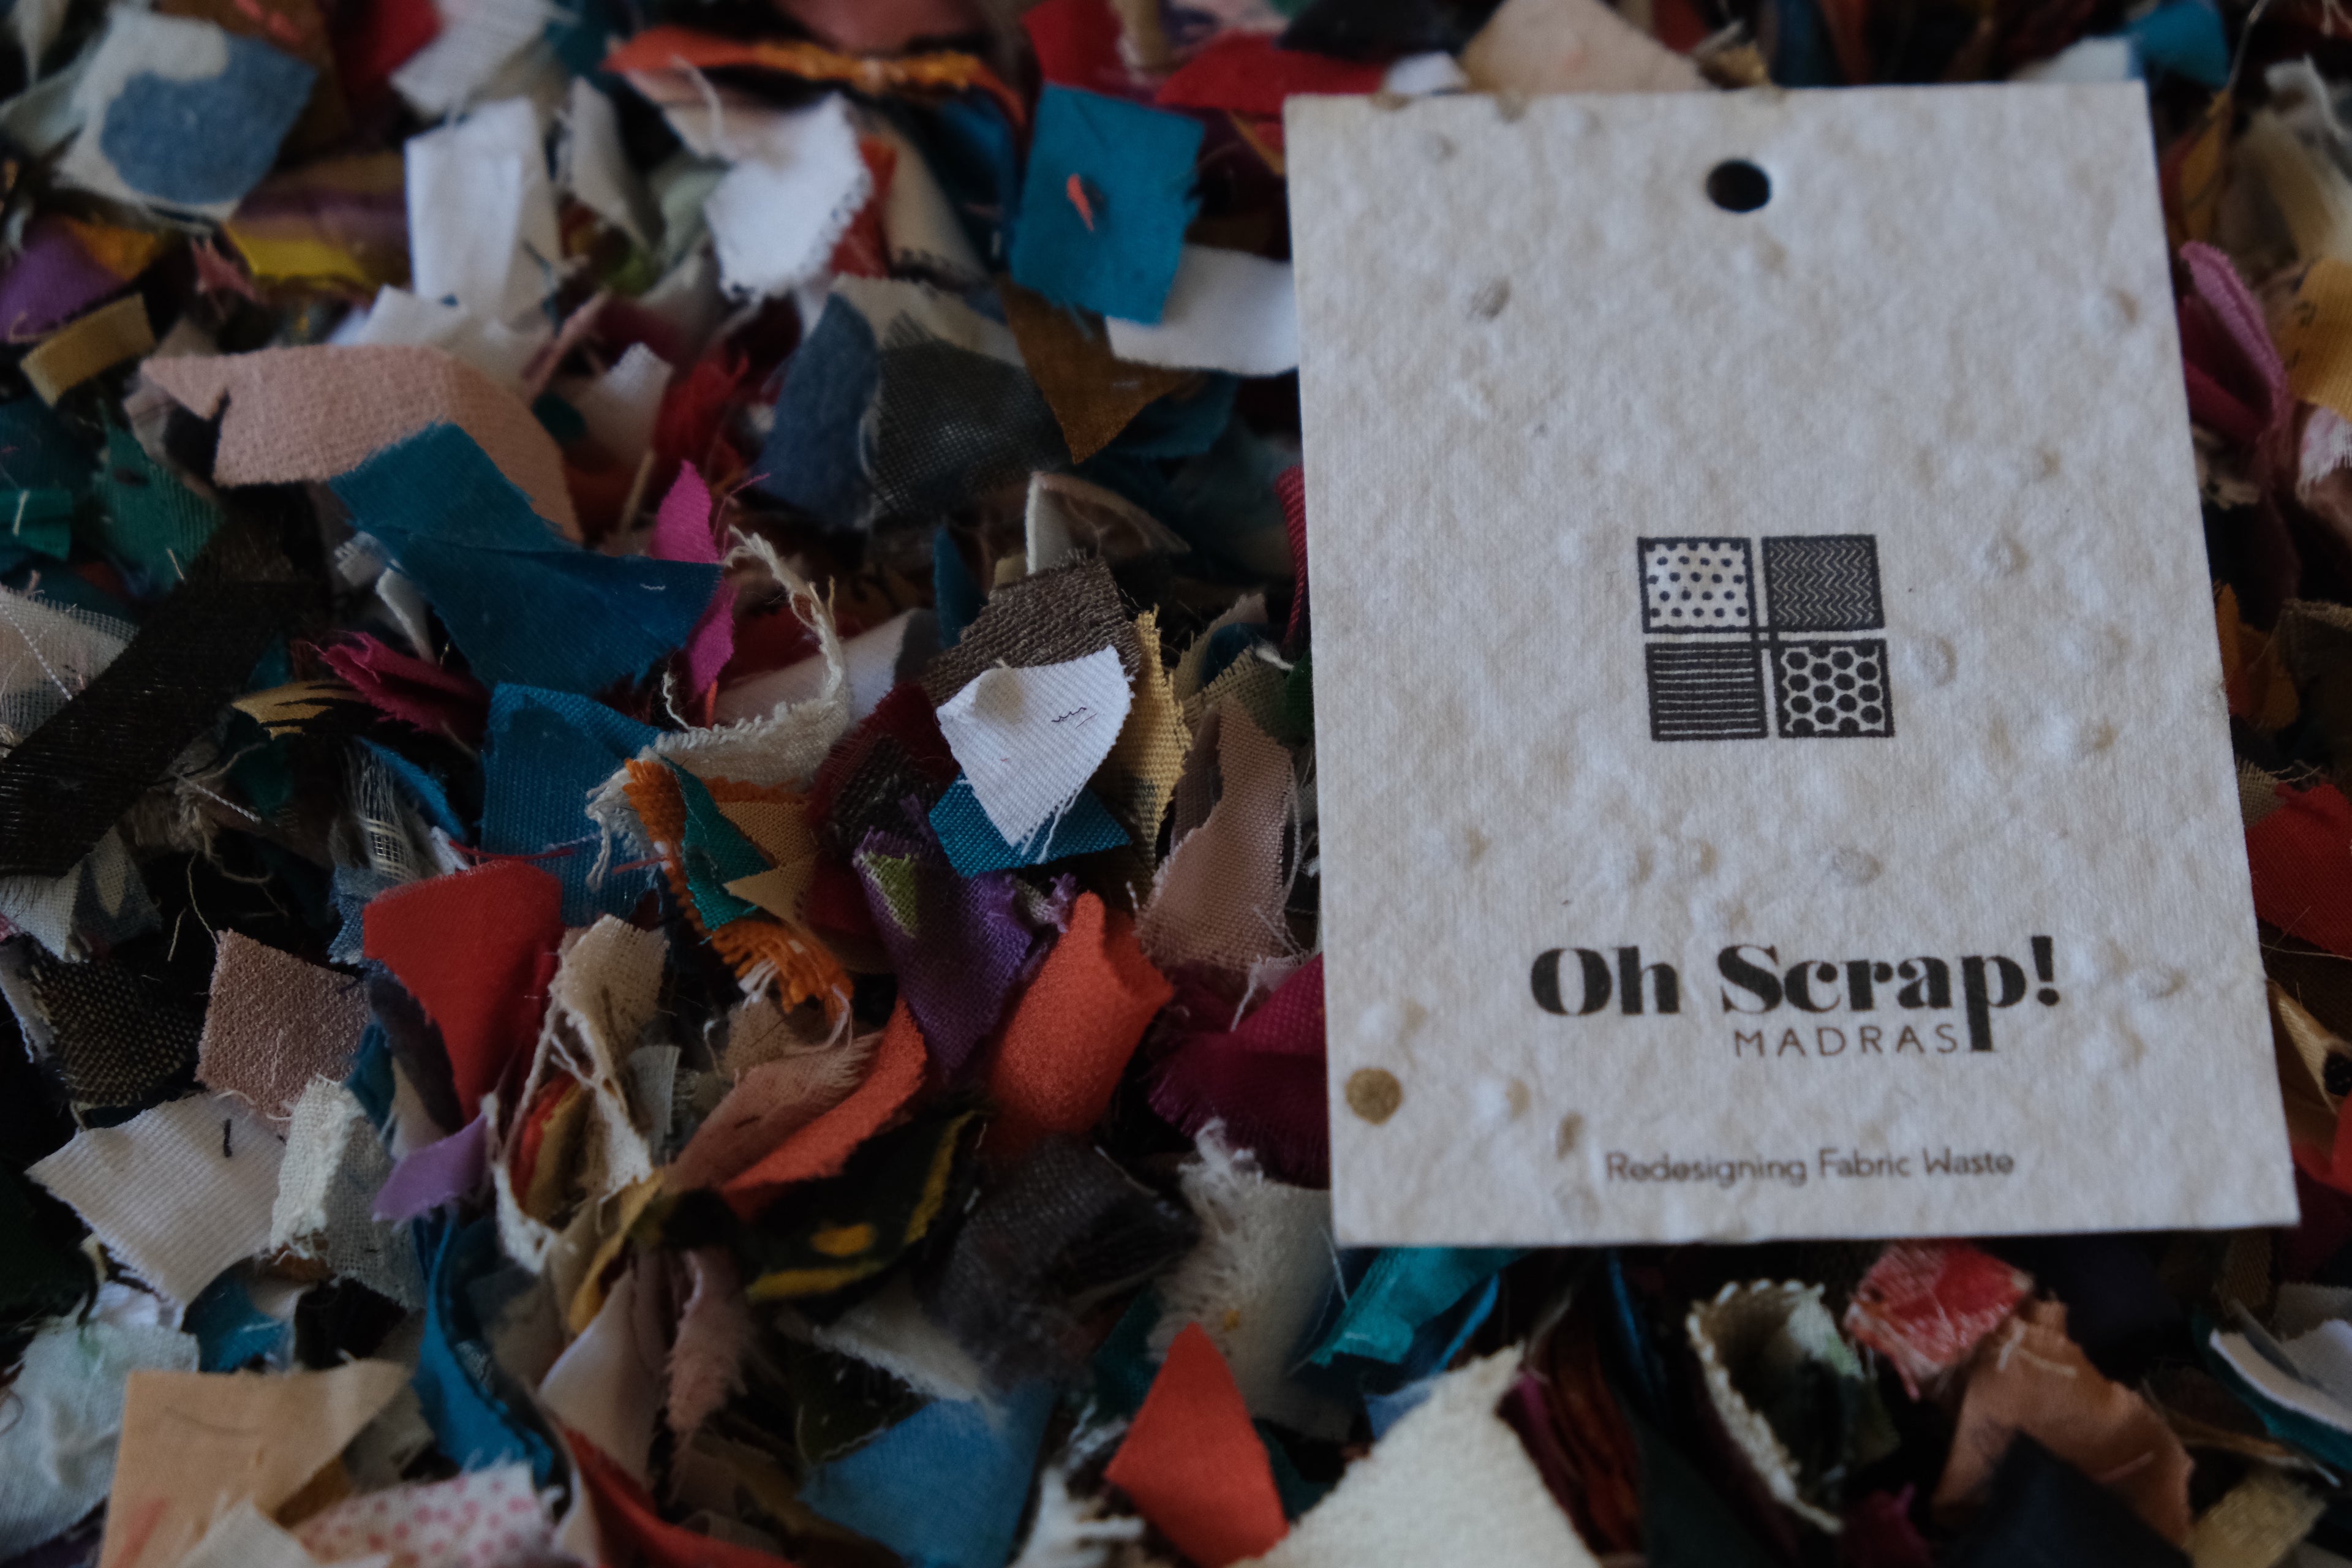 At Oh Scrap Madras, we're proud to work alongside our valued partners, creating beautiful upcycled treasures from fabric scraps. 